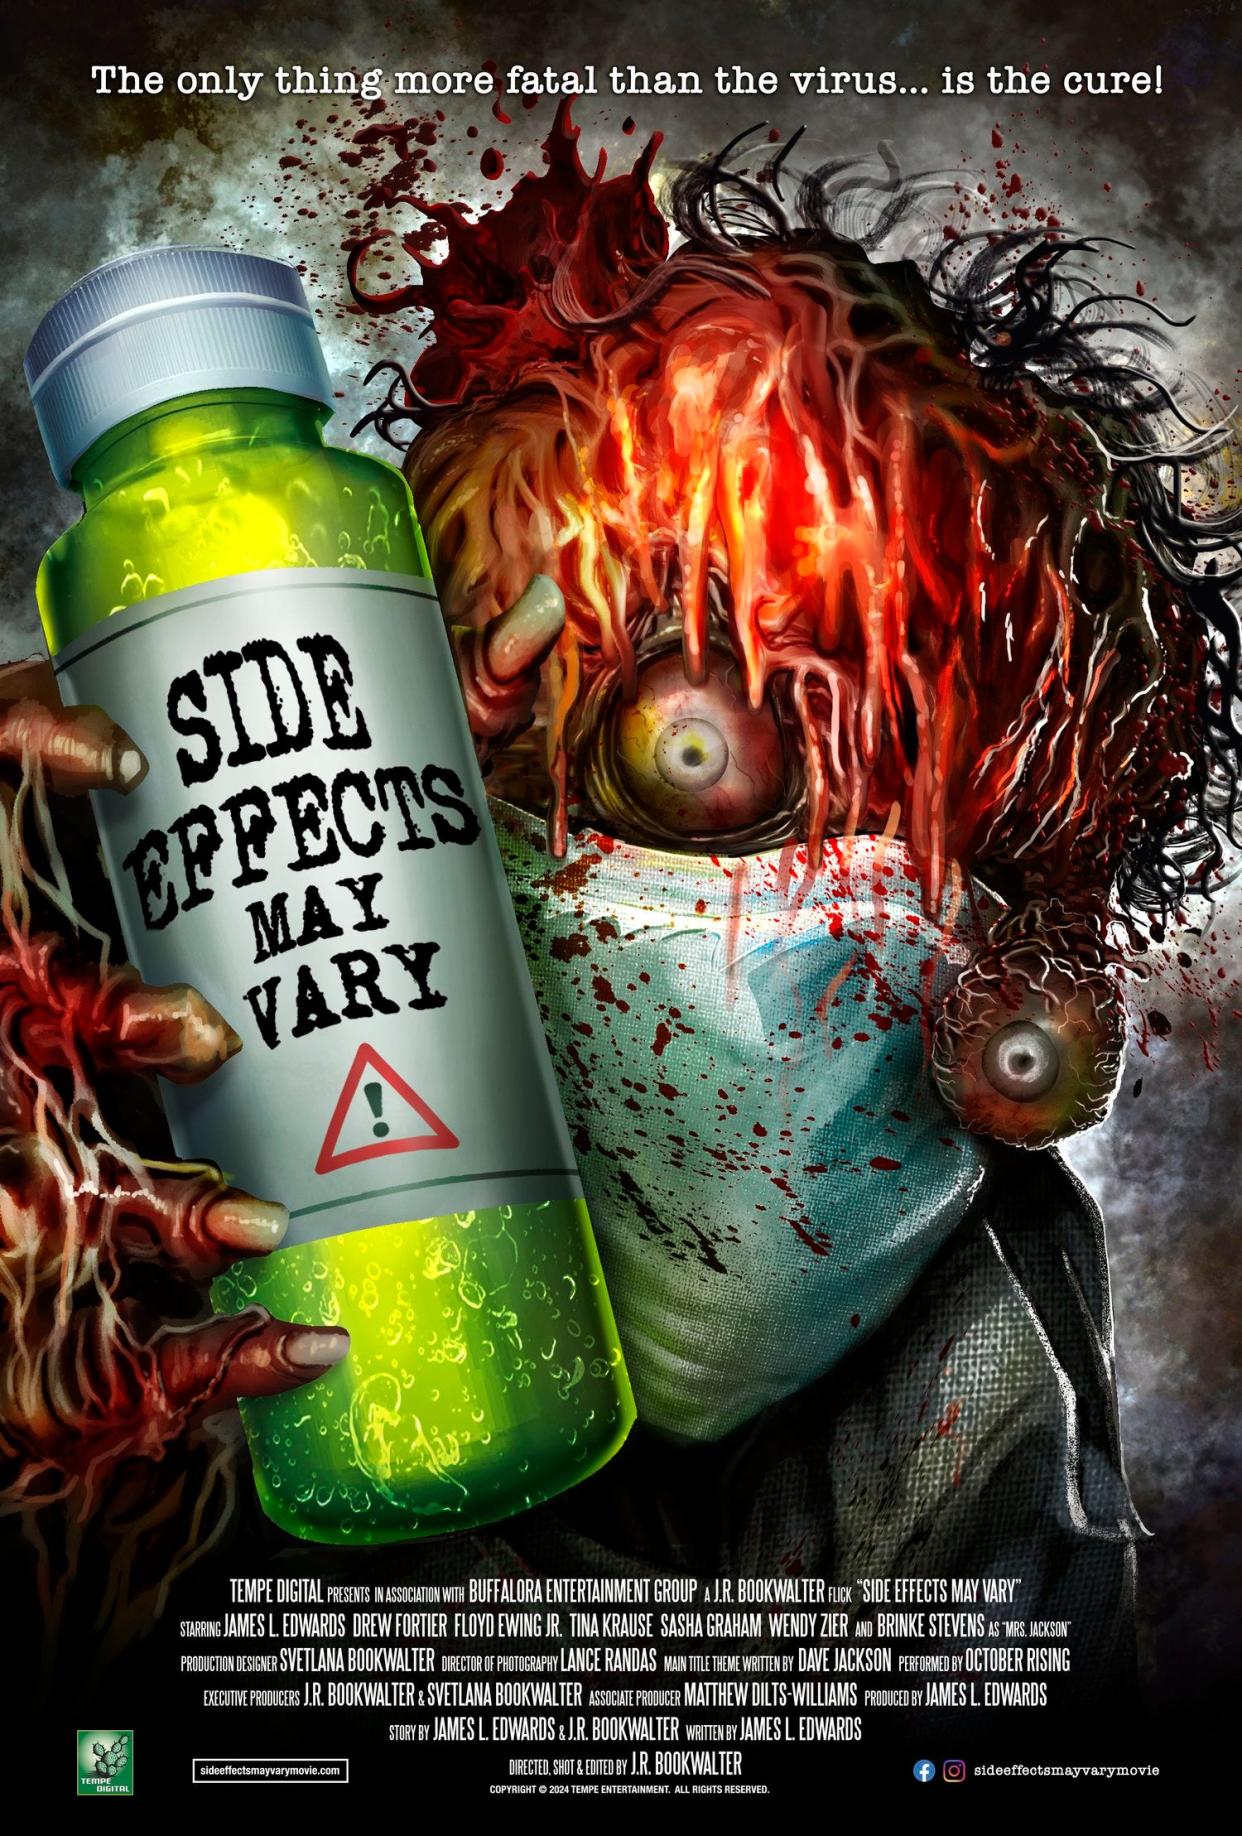 “Side Effects May Vary” is the new horror film from Akron native J.R. Bookwalter.